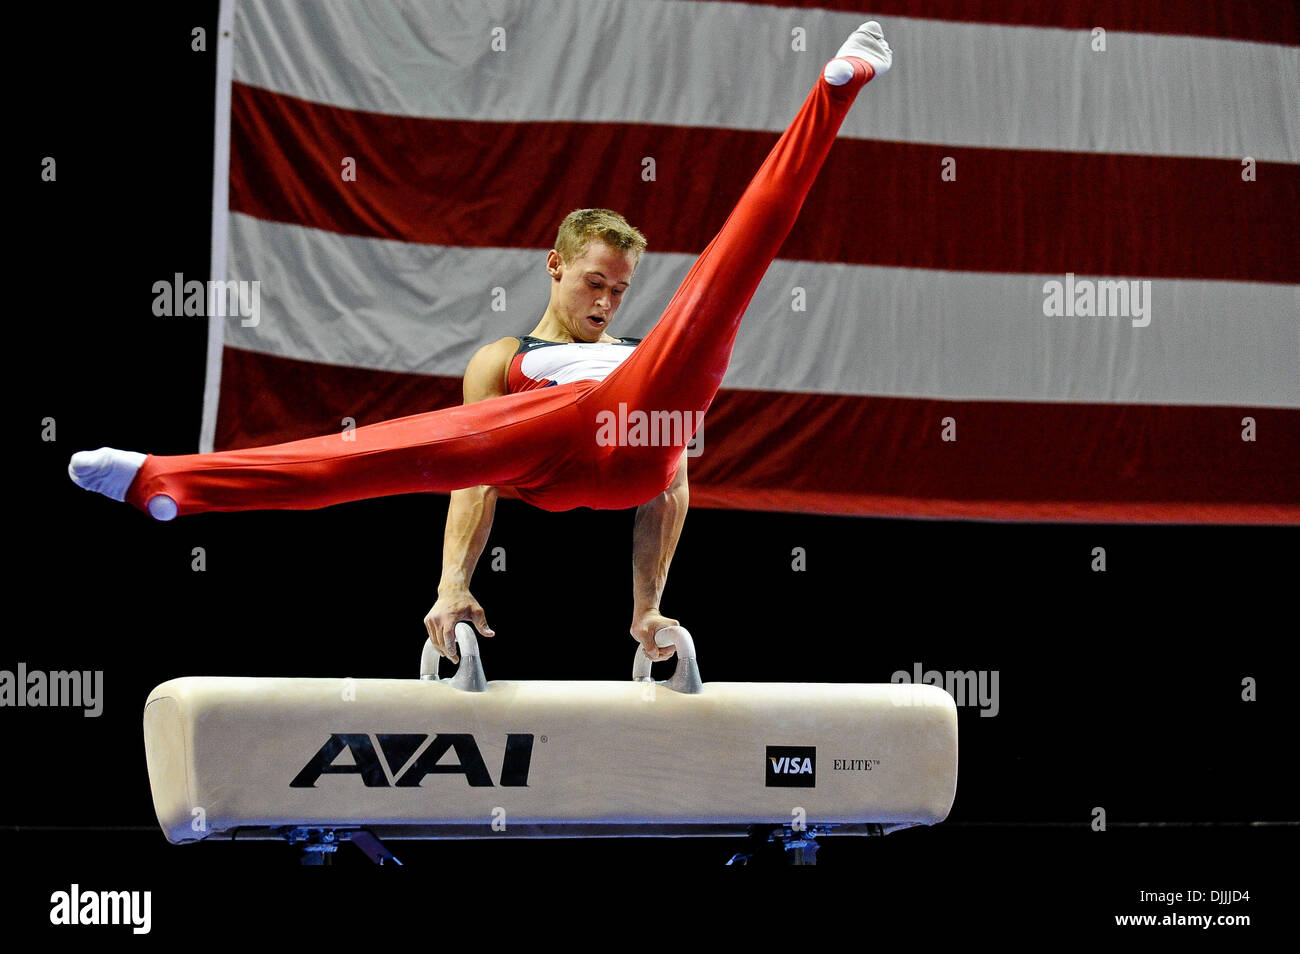 Aug. 13, 2010 - Hartford, Connecticut, United States of America - August 13, 2010: ALEXY BILOZERTCHEV performs on the pommel horse during the 2010 VISA Championships men's final at the XL Center in Hartford,Connecticut. Mandatory Credit: Geoff Bolte / Southcreek Global (Credit Image: © Southcreek Global/ZUMApress.com) Stock Photo